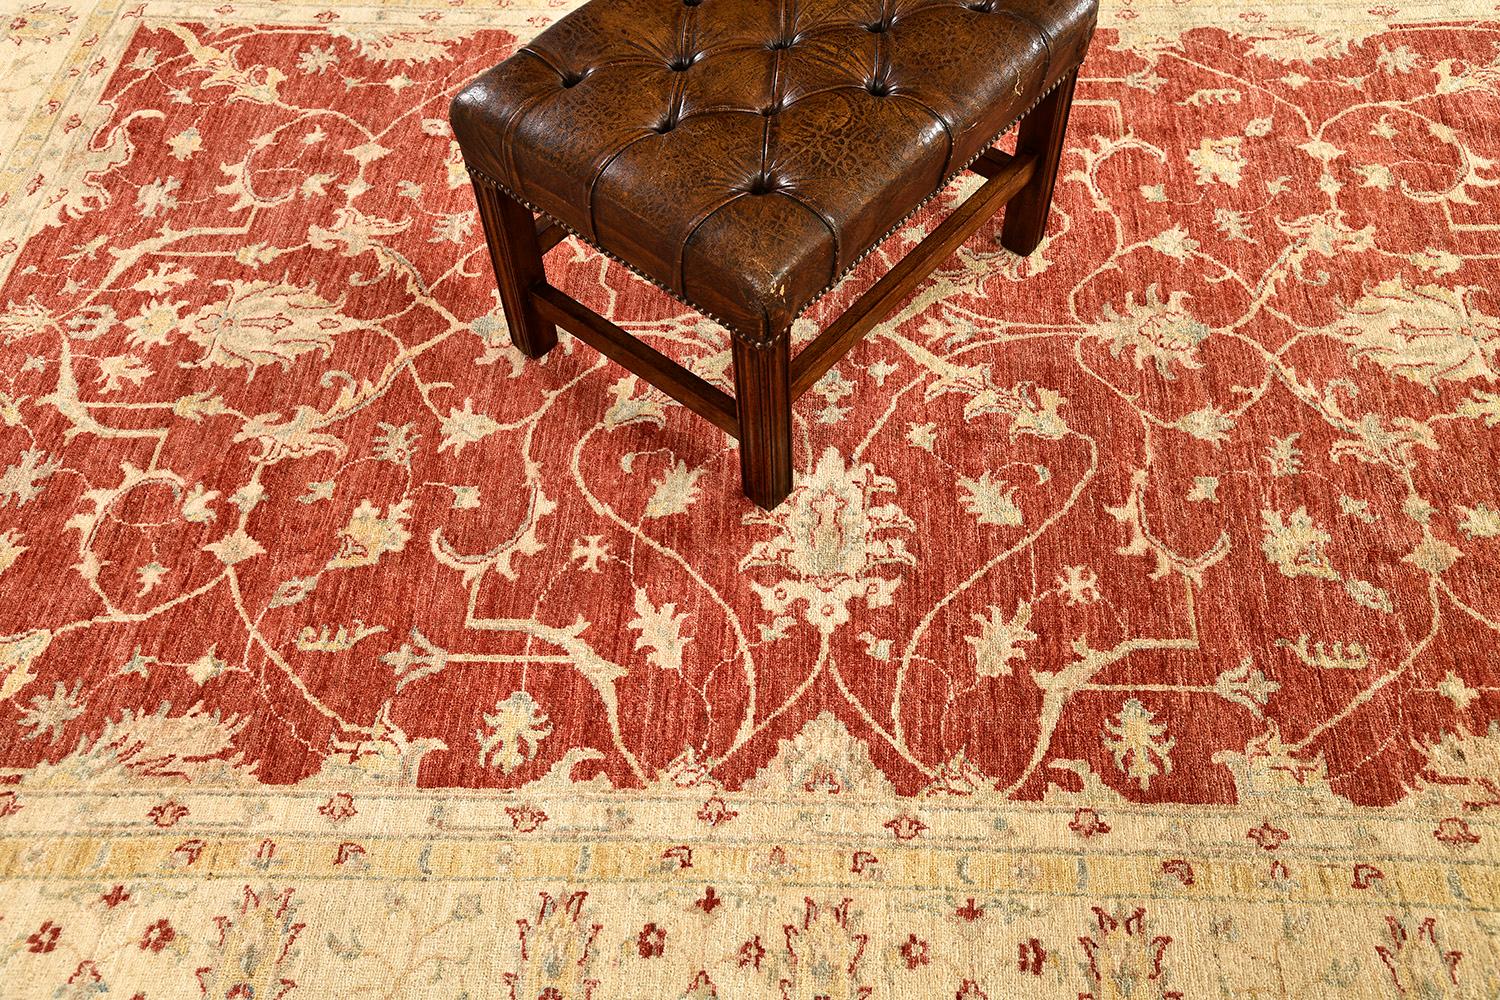 Series of medallions and florid ornaments are reflected through gold embellishments to blooming and dazzling dusty red fields. The borders are beautifully hand-woven that created from a vegetable dye to form an amazing Sultanabad Design Rug. Truly a